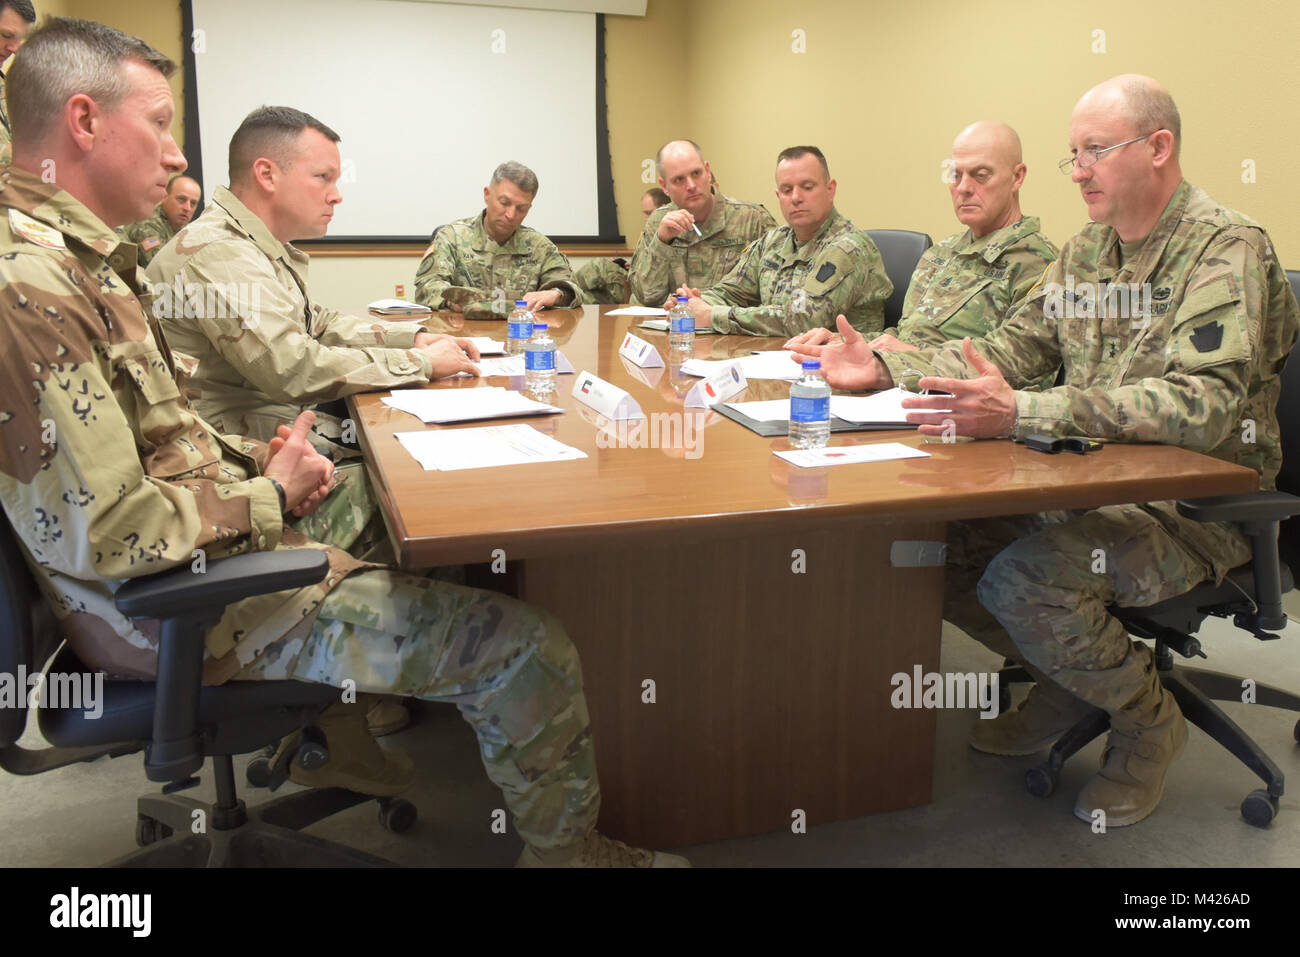 Maj. Gen. Andrew Schafer Jr. (right) and Command Sgt. Maj. John Jones (second from right), command team of the Pennsylvania Army National Guard's 28th Infantry Division, participate in a simulated key leader engagement with role-played Kuwait military leaders during the 28th ID's culminating training exercise with First Army at Fort Hood, Texas, Jan. 31, 2018. About 500 28th ID Soldiers will be headquartered in Kuwait during their upcoming nine-month deployment. Stock Photo